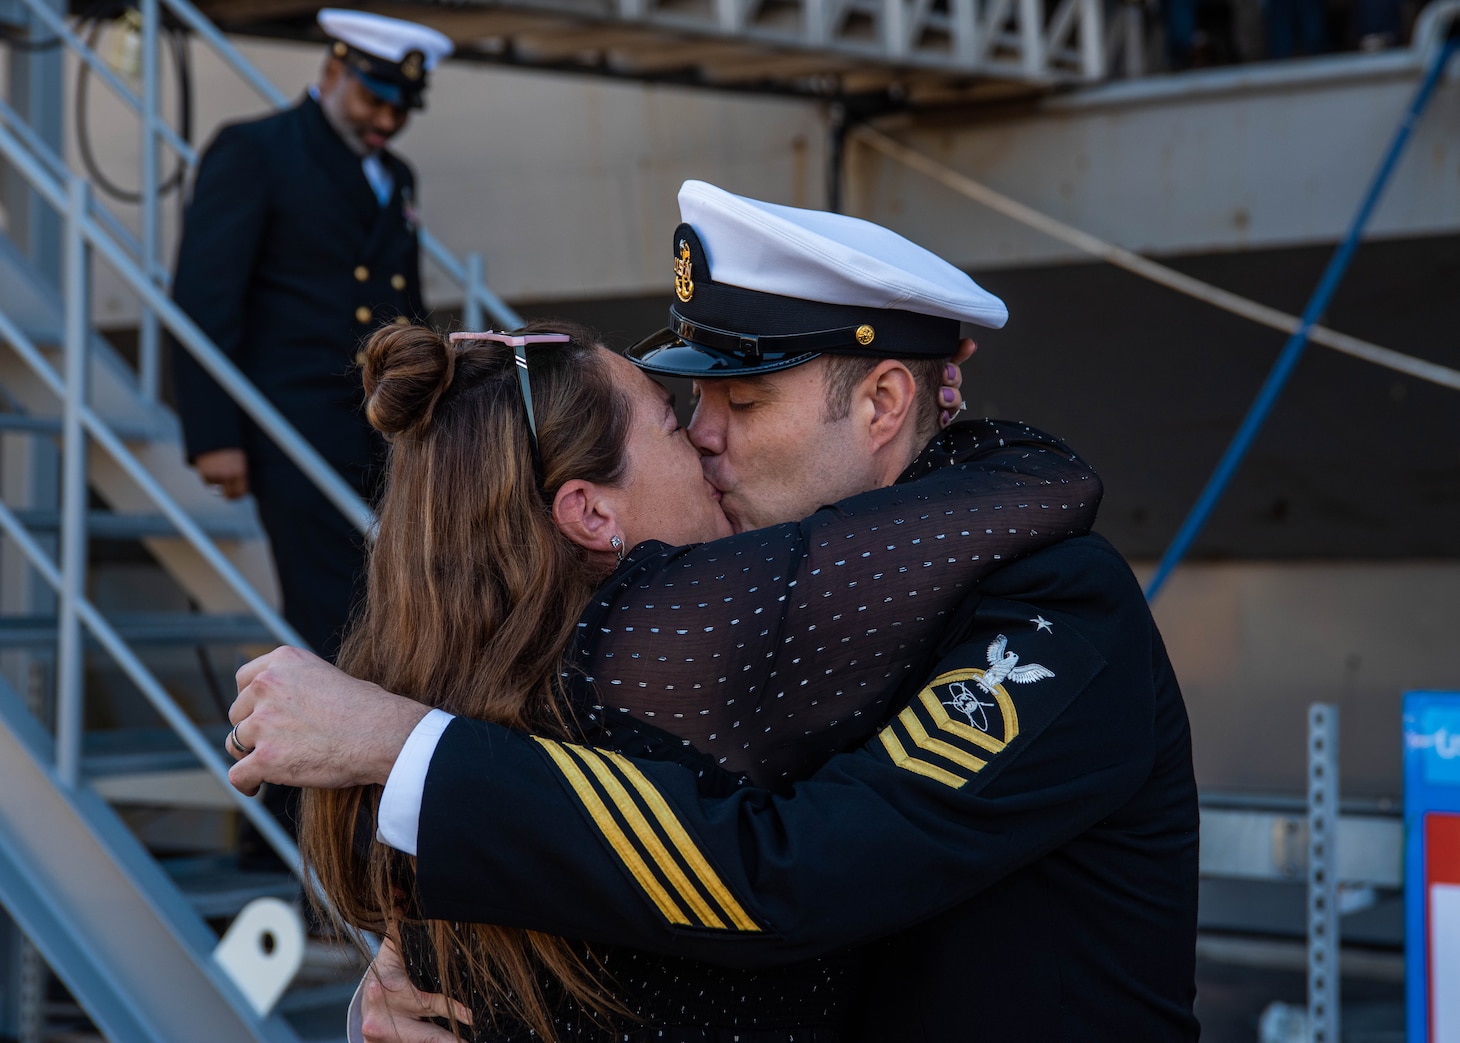 YOKOSUKA, Japan (Nov. 19, 2023) Senior Chief Mass Communication Specialist Matthew White, kisses his wife on the pier after the U.S. Navy’s only forward-deployed aircraft carrier, USS Ronald Reagan (CVN 76), returns to Commander, Fleet Activities Yokosuka, Japan, following a six-month deployment in the Indo-Pacific region, Nov. 19. During Ronald Reagan’s deployment, the ship conducted multinational exercises with the Japan Maritime Self-Defense Force (JMSDF), Royal Australian Navy, Indonesian Navy, and Republic of Korea Navy, a multi-large deck event with USS Carl Vinson (CVN 70), Carrier Strike Group 1, and JMSDF first-in-class helicopter destroyer JS Hyuga (DDH 181), and visited Vietnam, Republic of Korea, and the Philippines. Ronald Reagan, the flagship of Carrier Strike Group 5, provides a combat-ready force that protects and defends the United States, and supports alliances, partnerships and collective maritime interests in the Indo-Pacific region. (U.S. Navy photo by Mass Communication Specialist 3rd Class Jordan Brown)